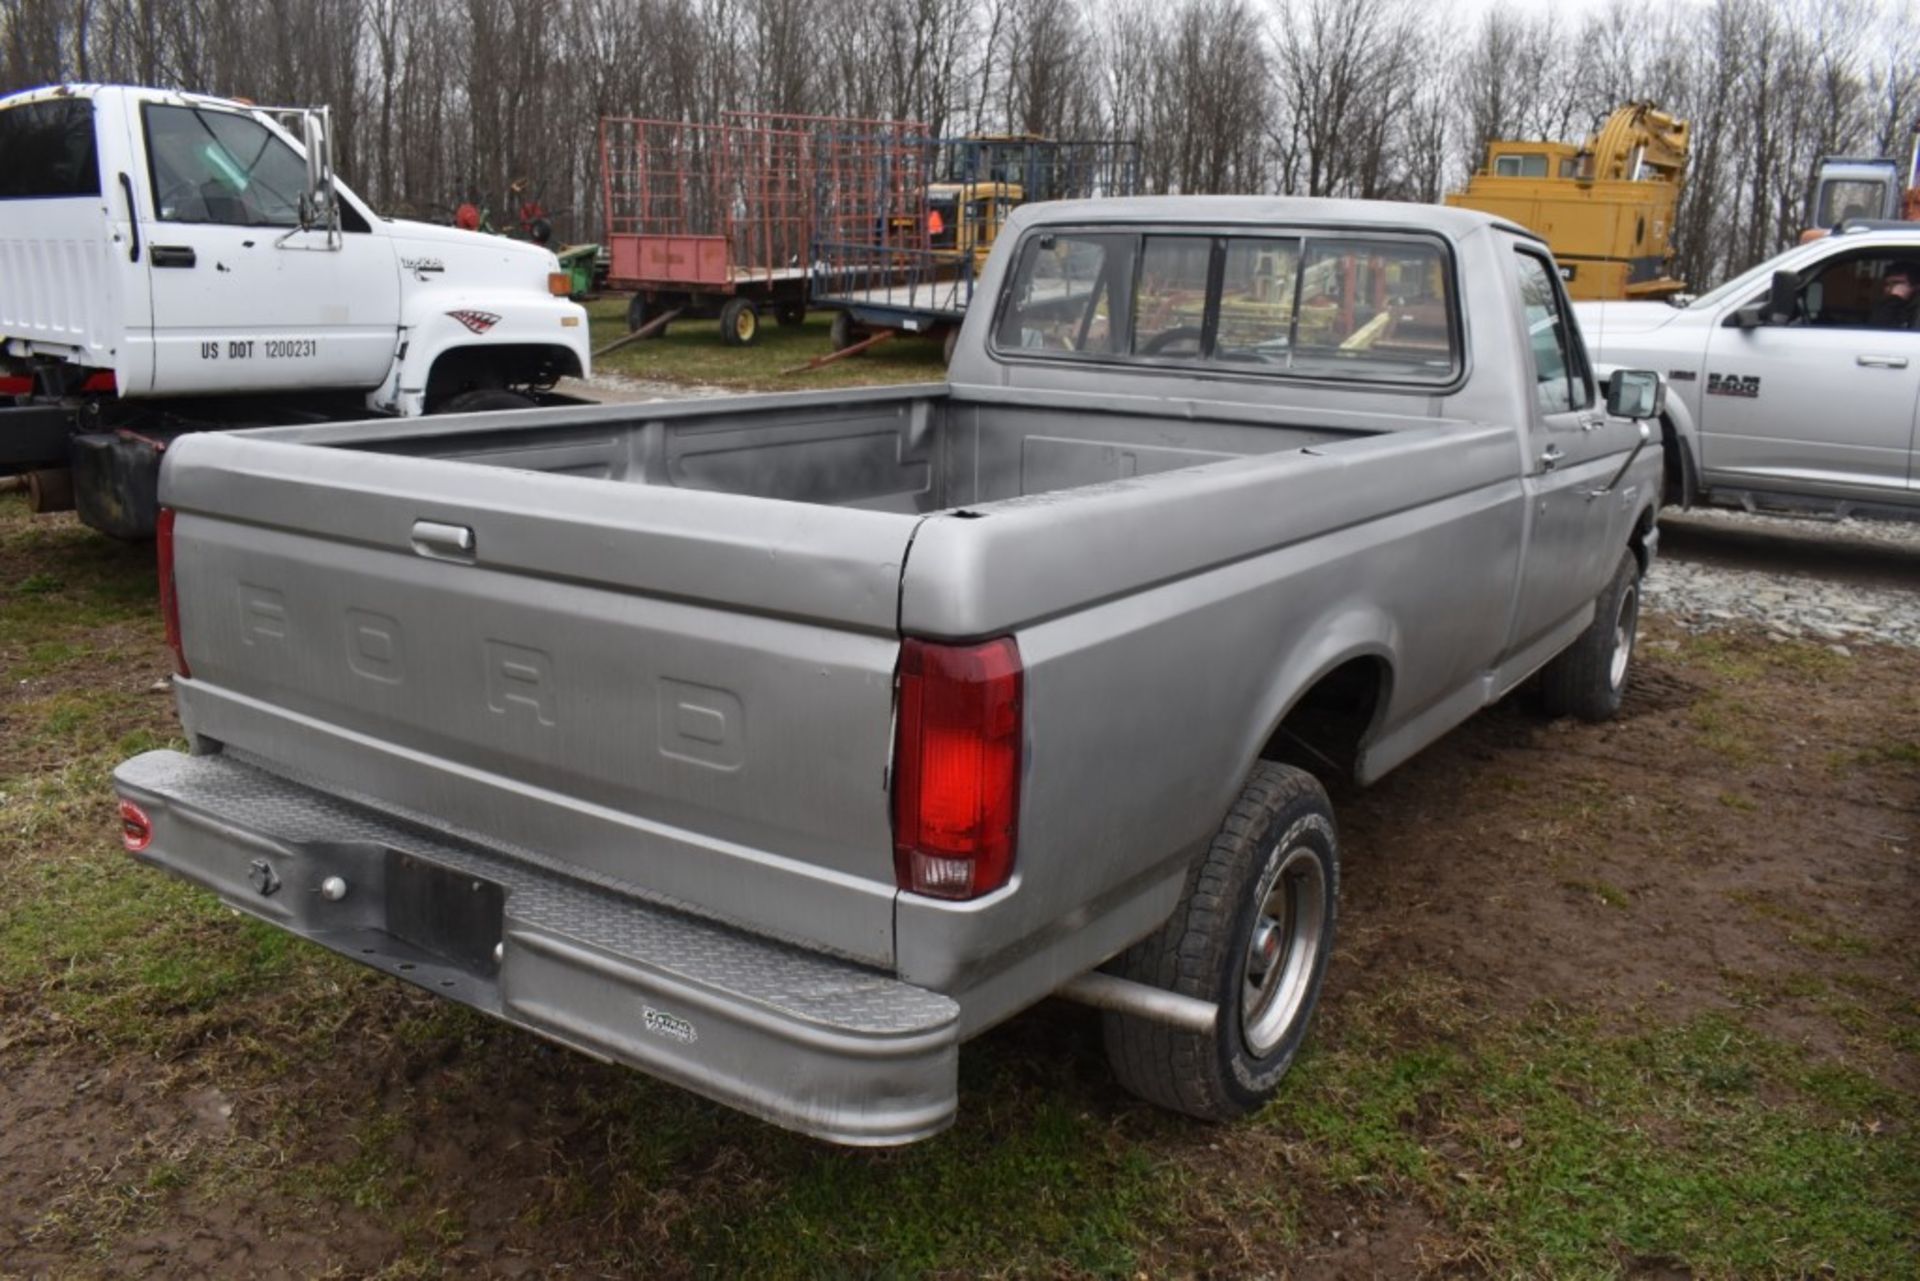 1987 Ford F-150 Truck - Image 12 of 36